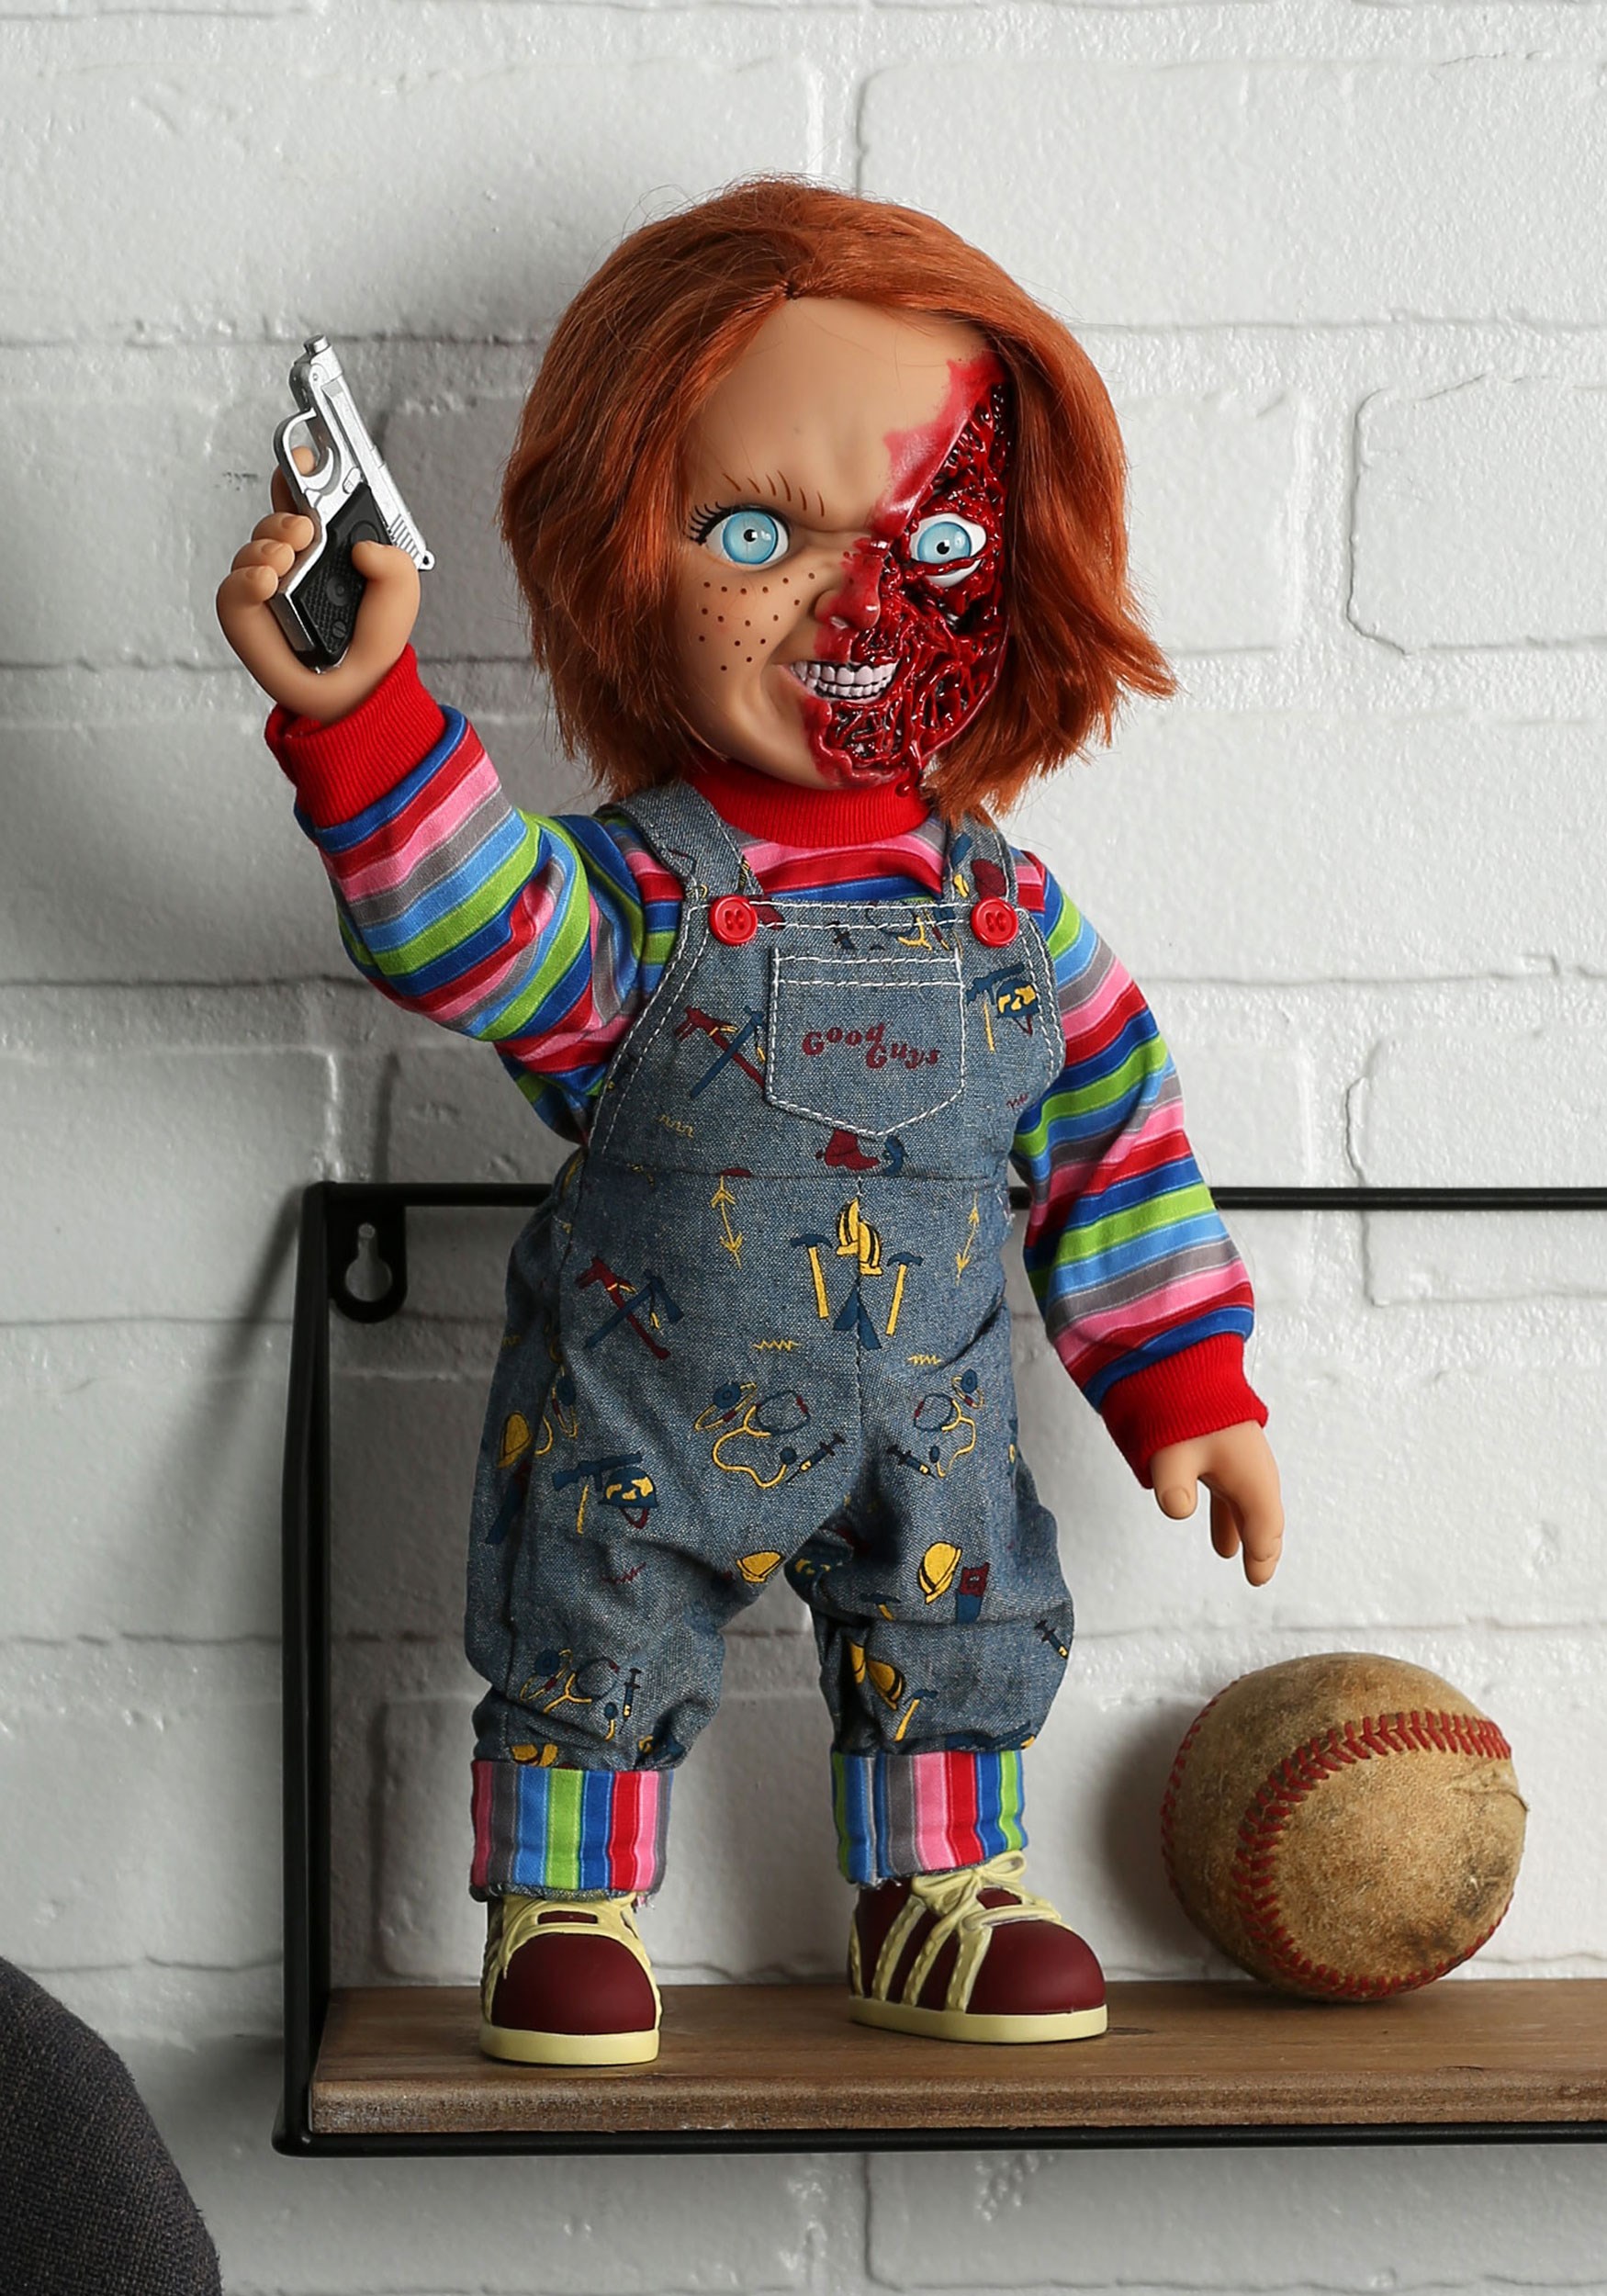 Pizza Face Chucky Talking Doll Version from Childs Play 3